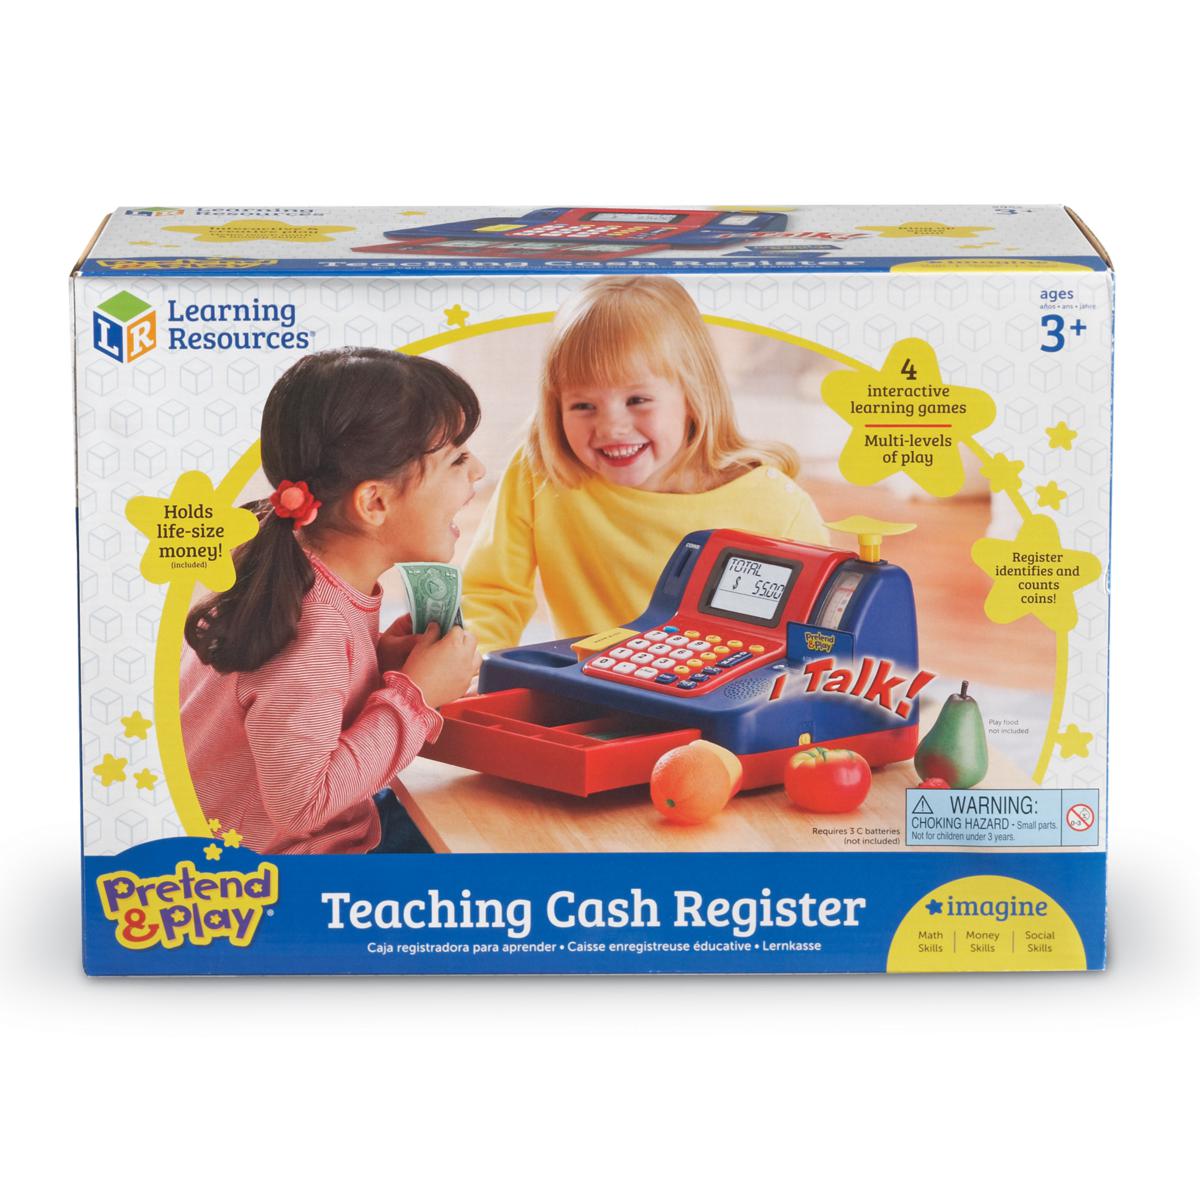 Learning Resources Pretend and Play Teaching Cash Register - 20360315